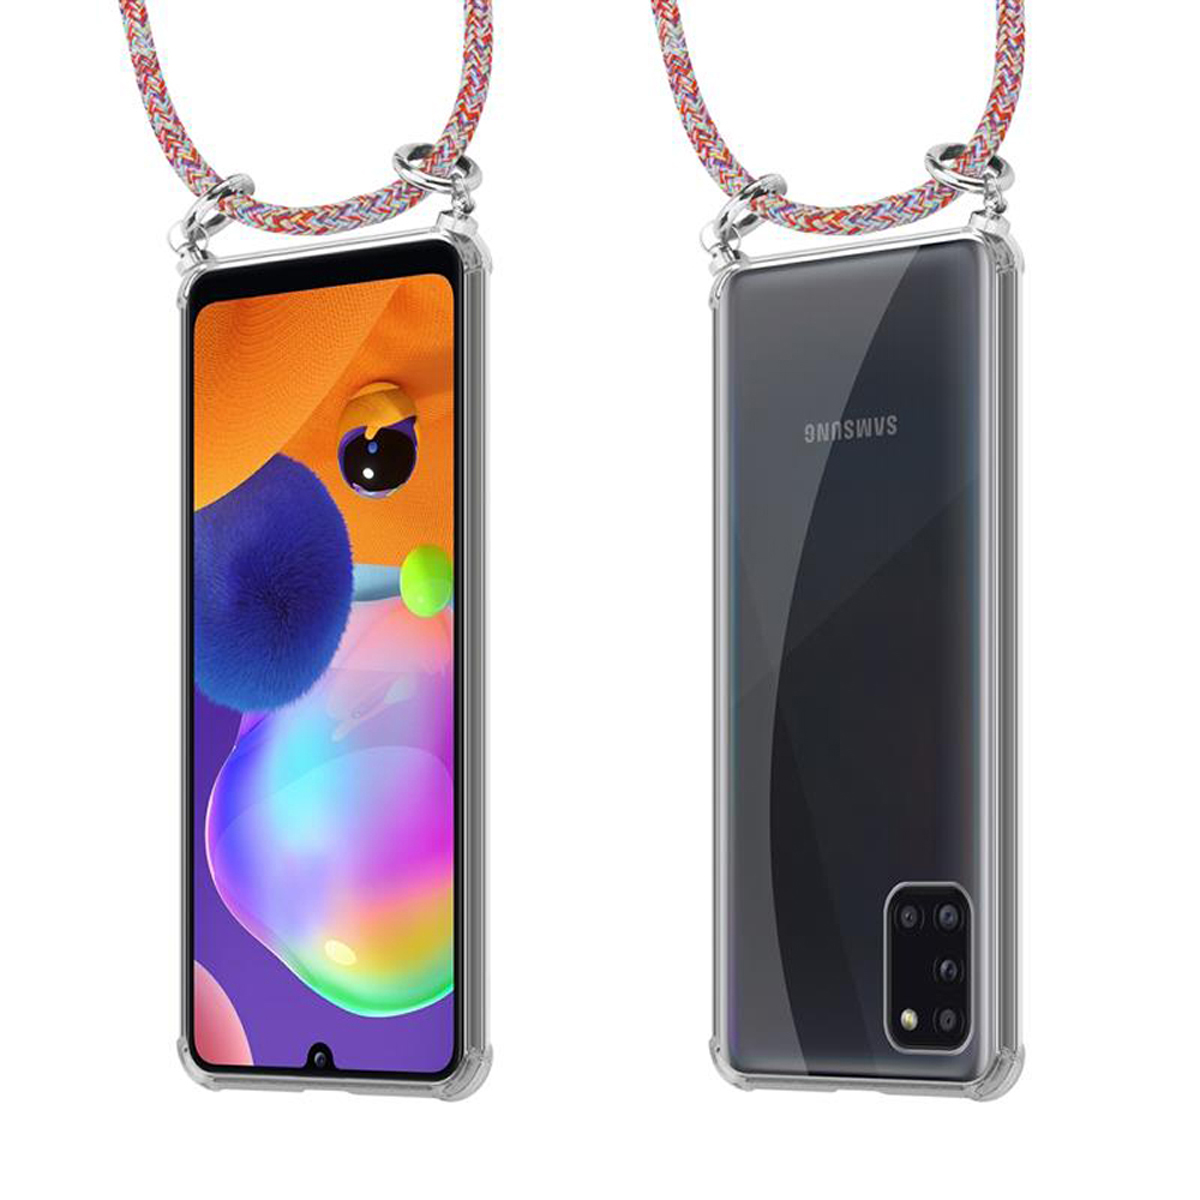 A31, CADORABO und PARROT Hülle, Galaxy Silber Band Samsung, Kordel COLORFUL Handy Ringen, Kette abnehmbarer mit Backcover,